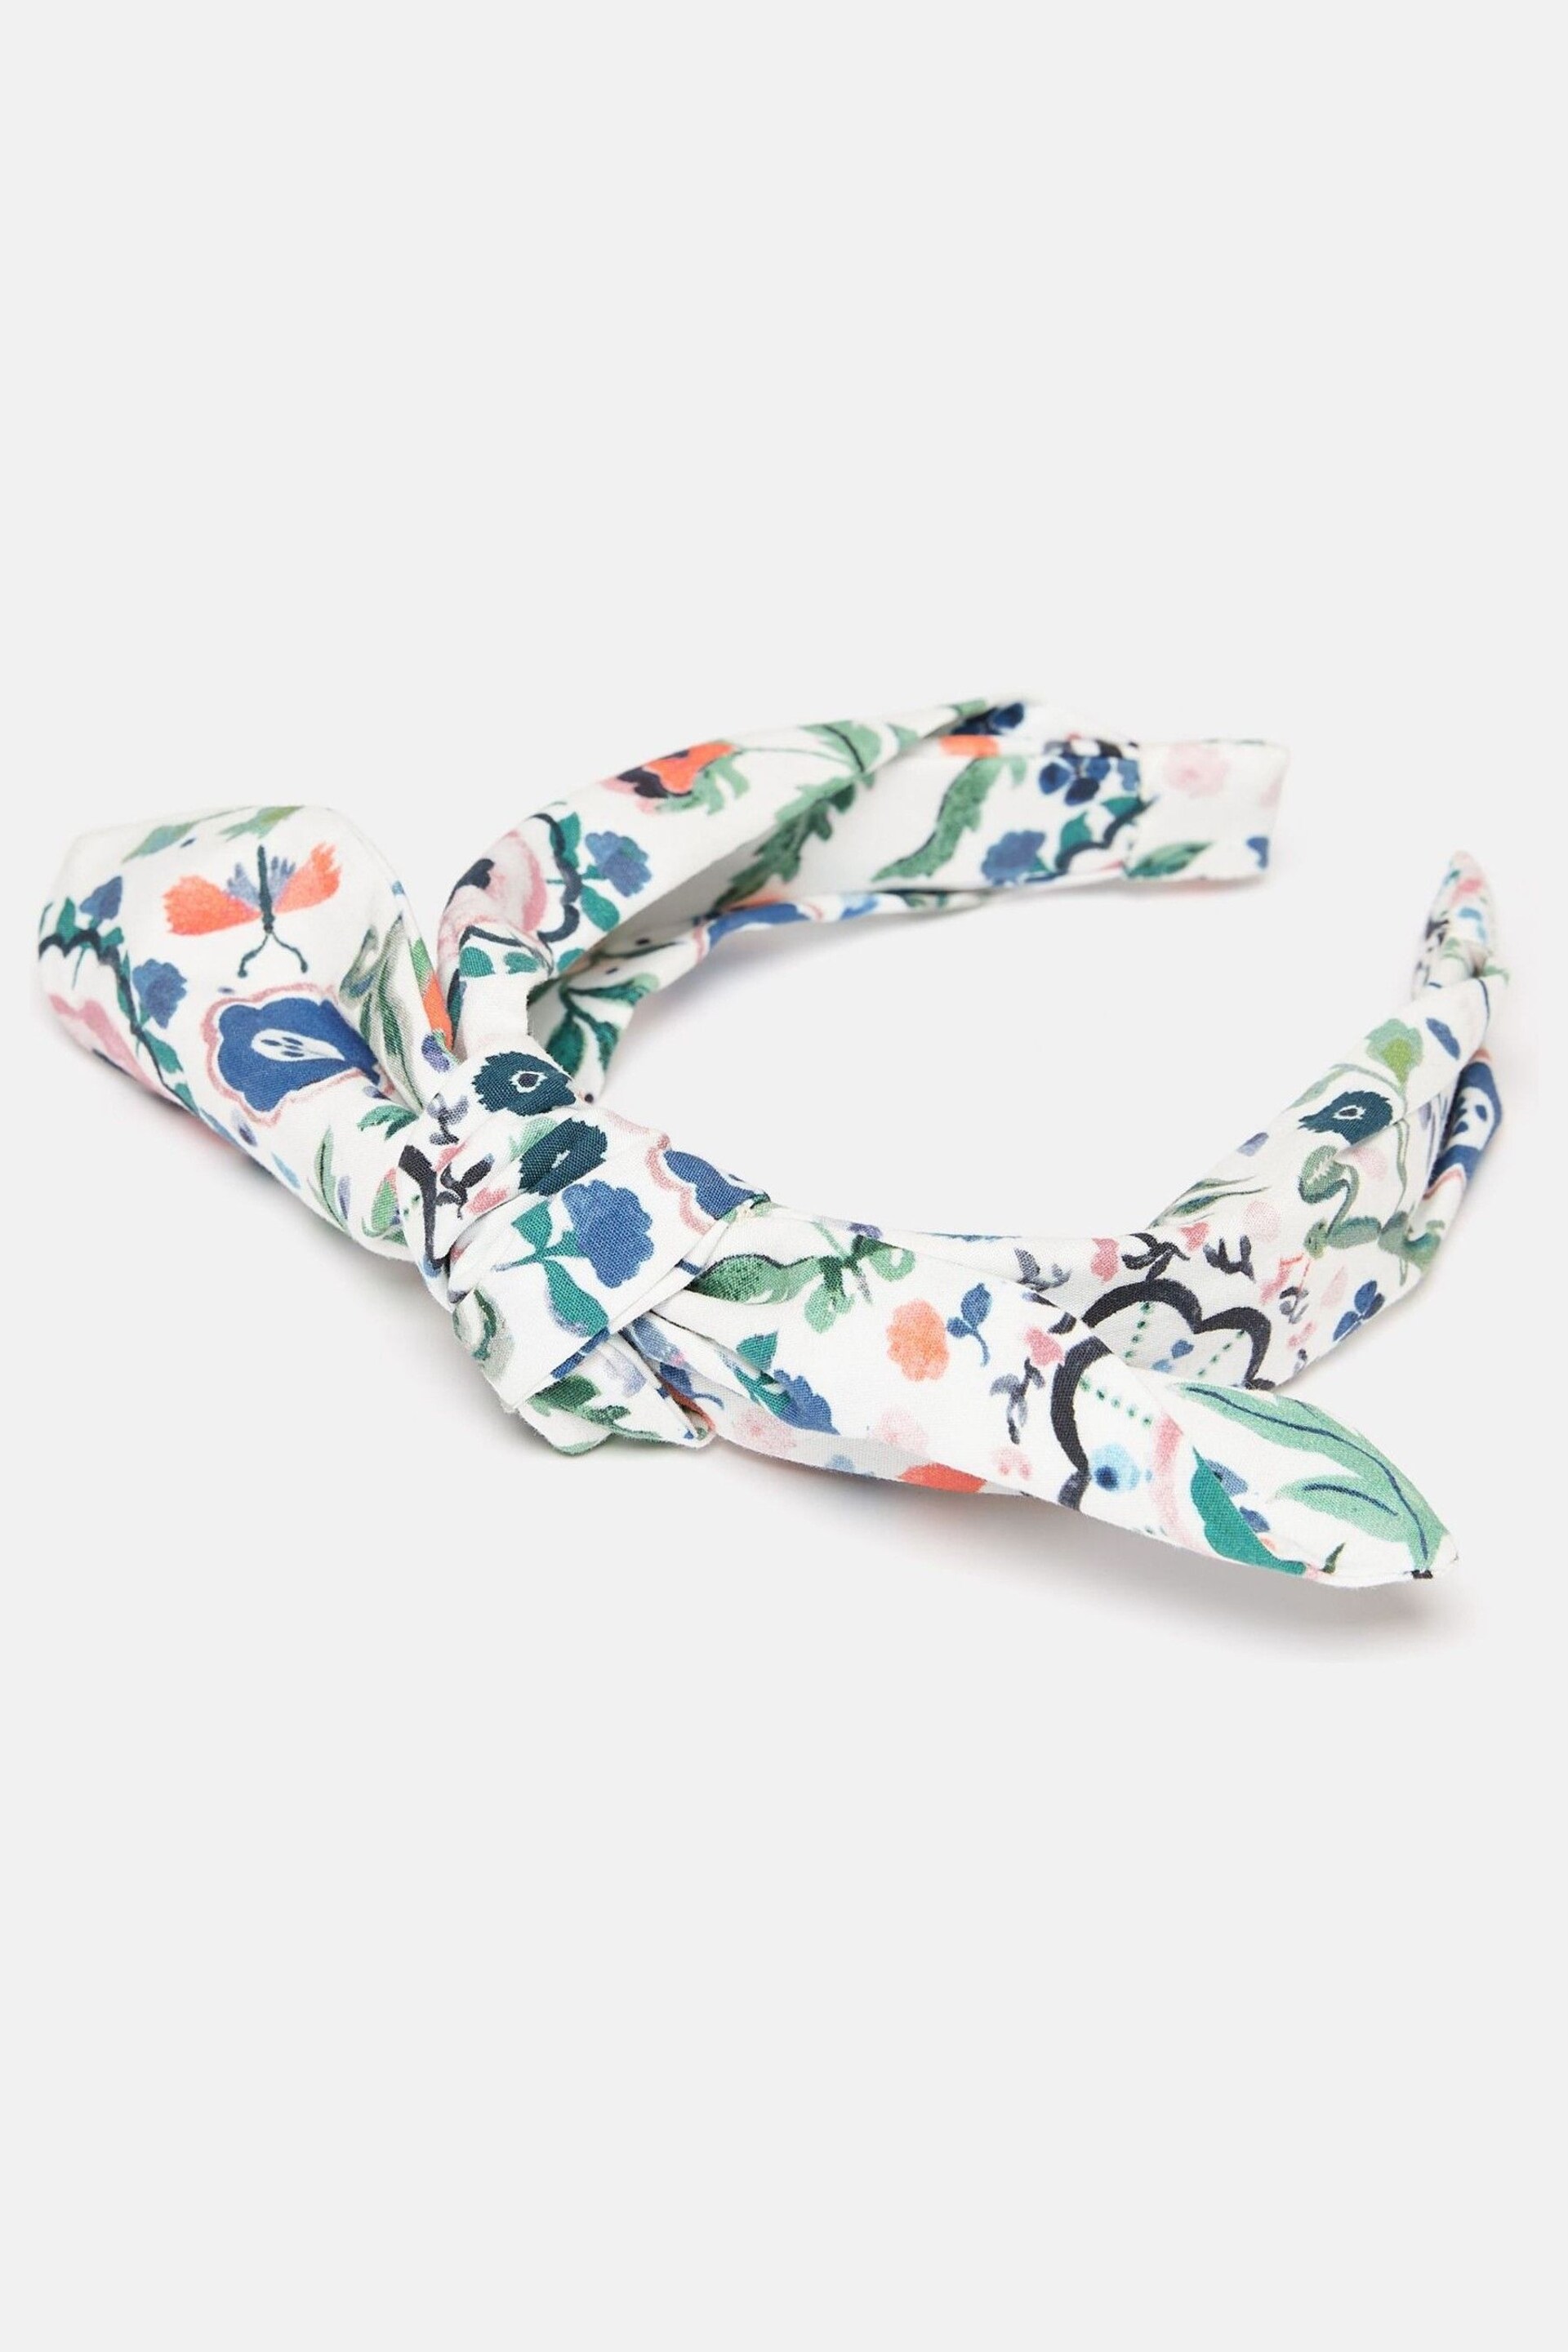 Joules Shelley Floral Girls' Printed Headband - Image 2 of 3